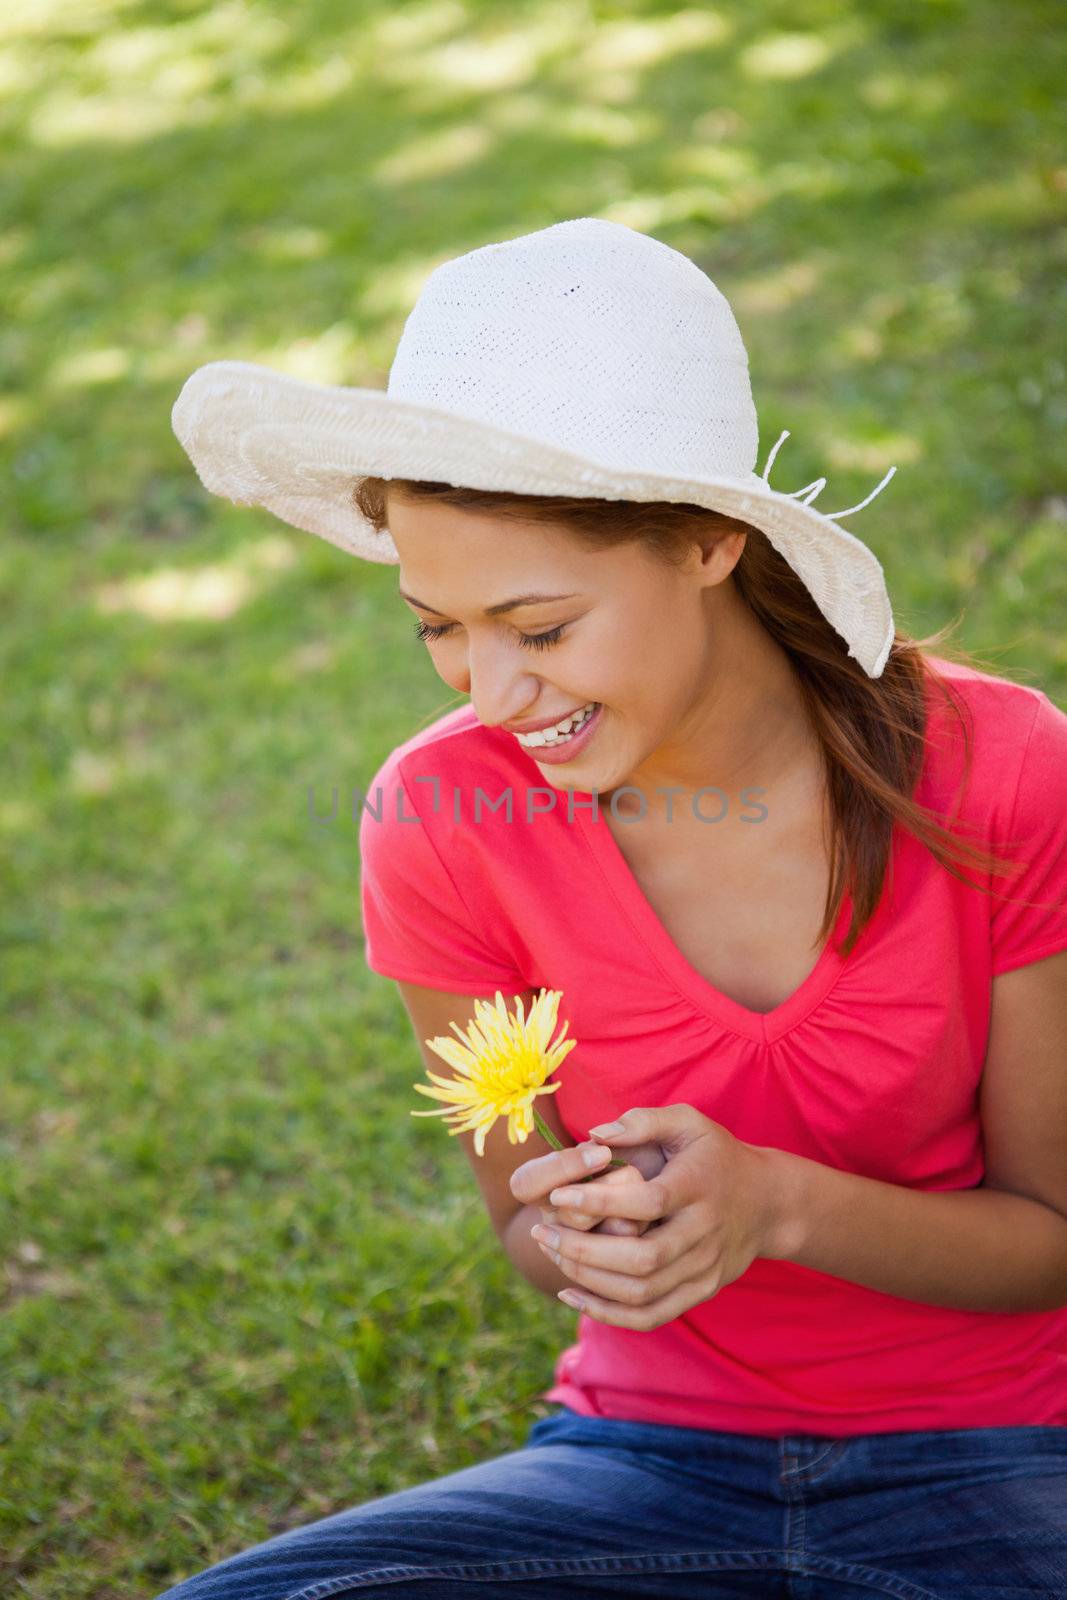 Woman laughing while wearing a white hat and holding a yellow fl by Wavebreakmedia